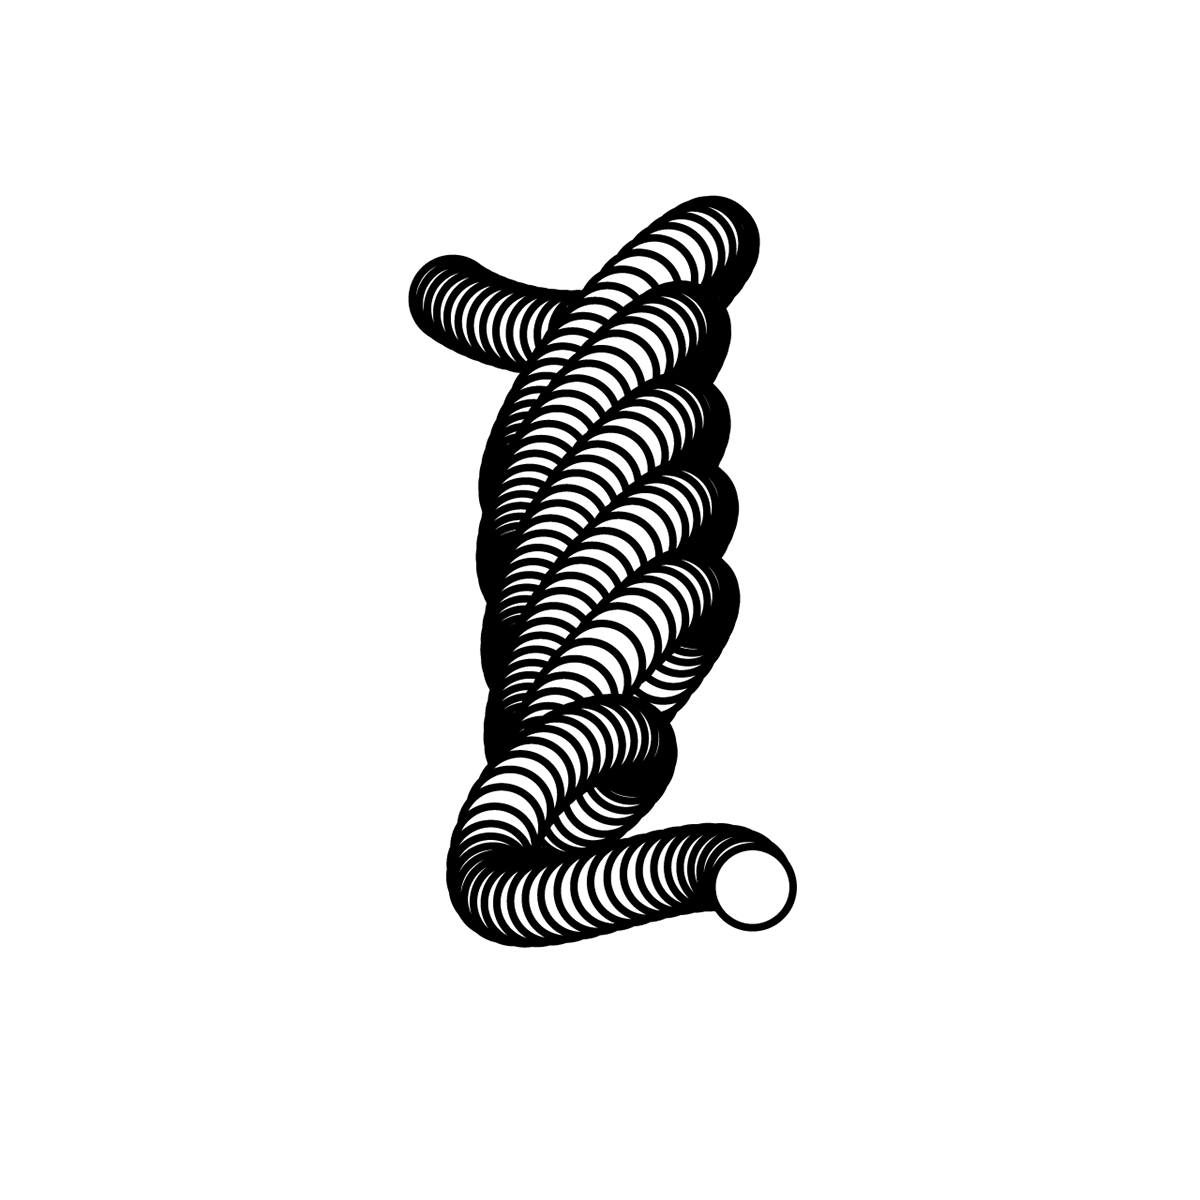 36daysoftype 36 days type Project OPEN CALL typedaily dailytype daily rafa goicoechea graphicdesign experimental letters glyphs black vector